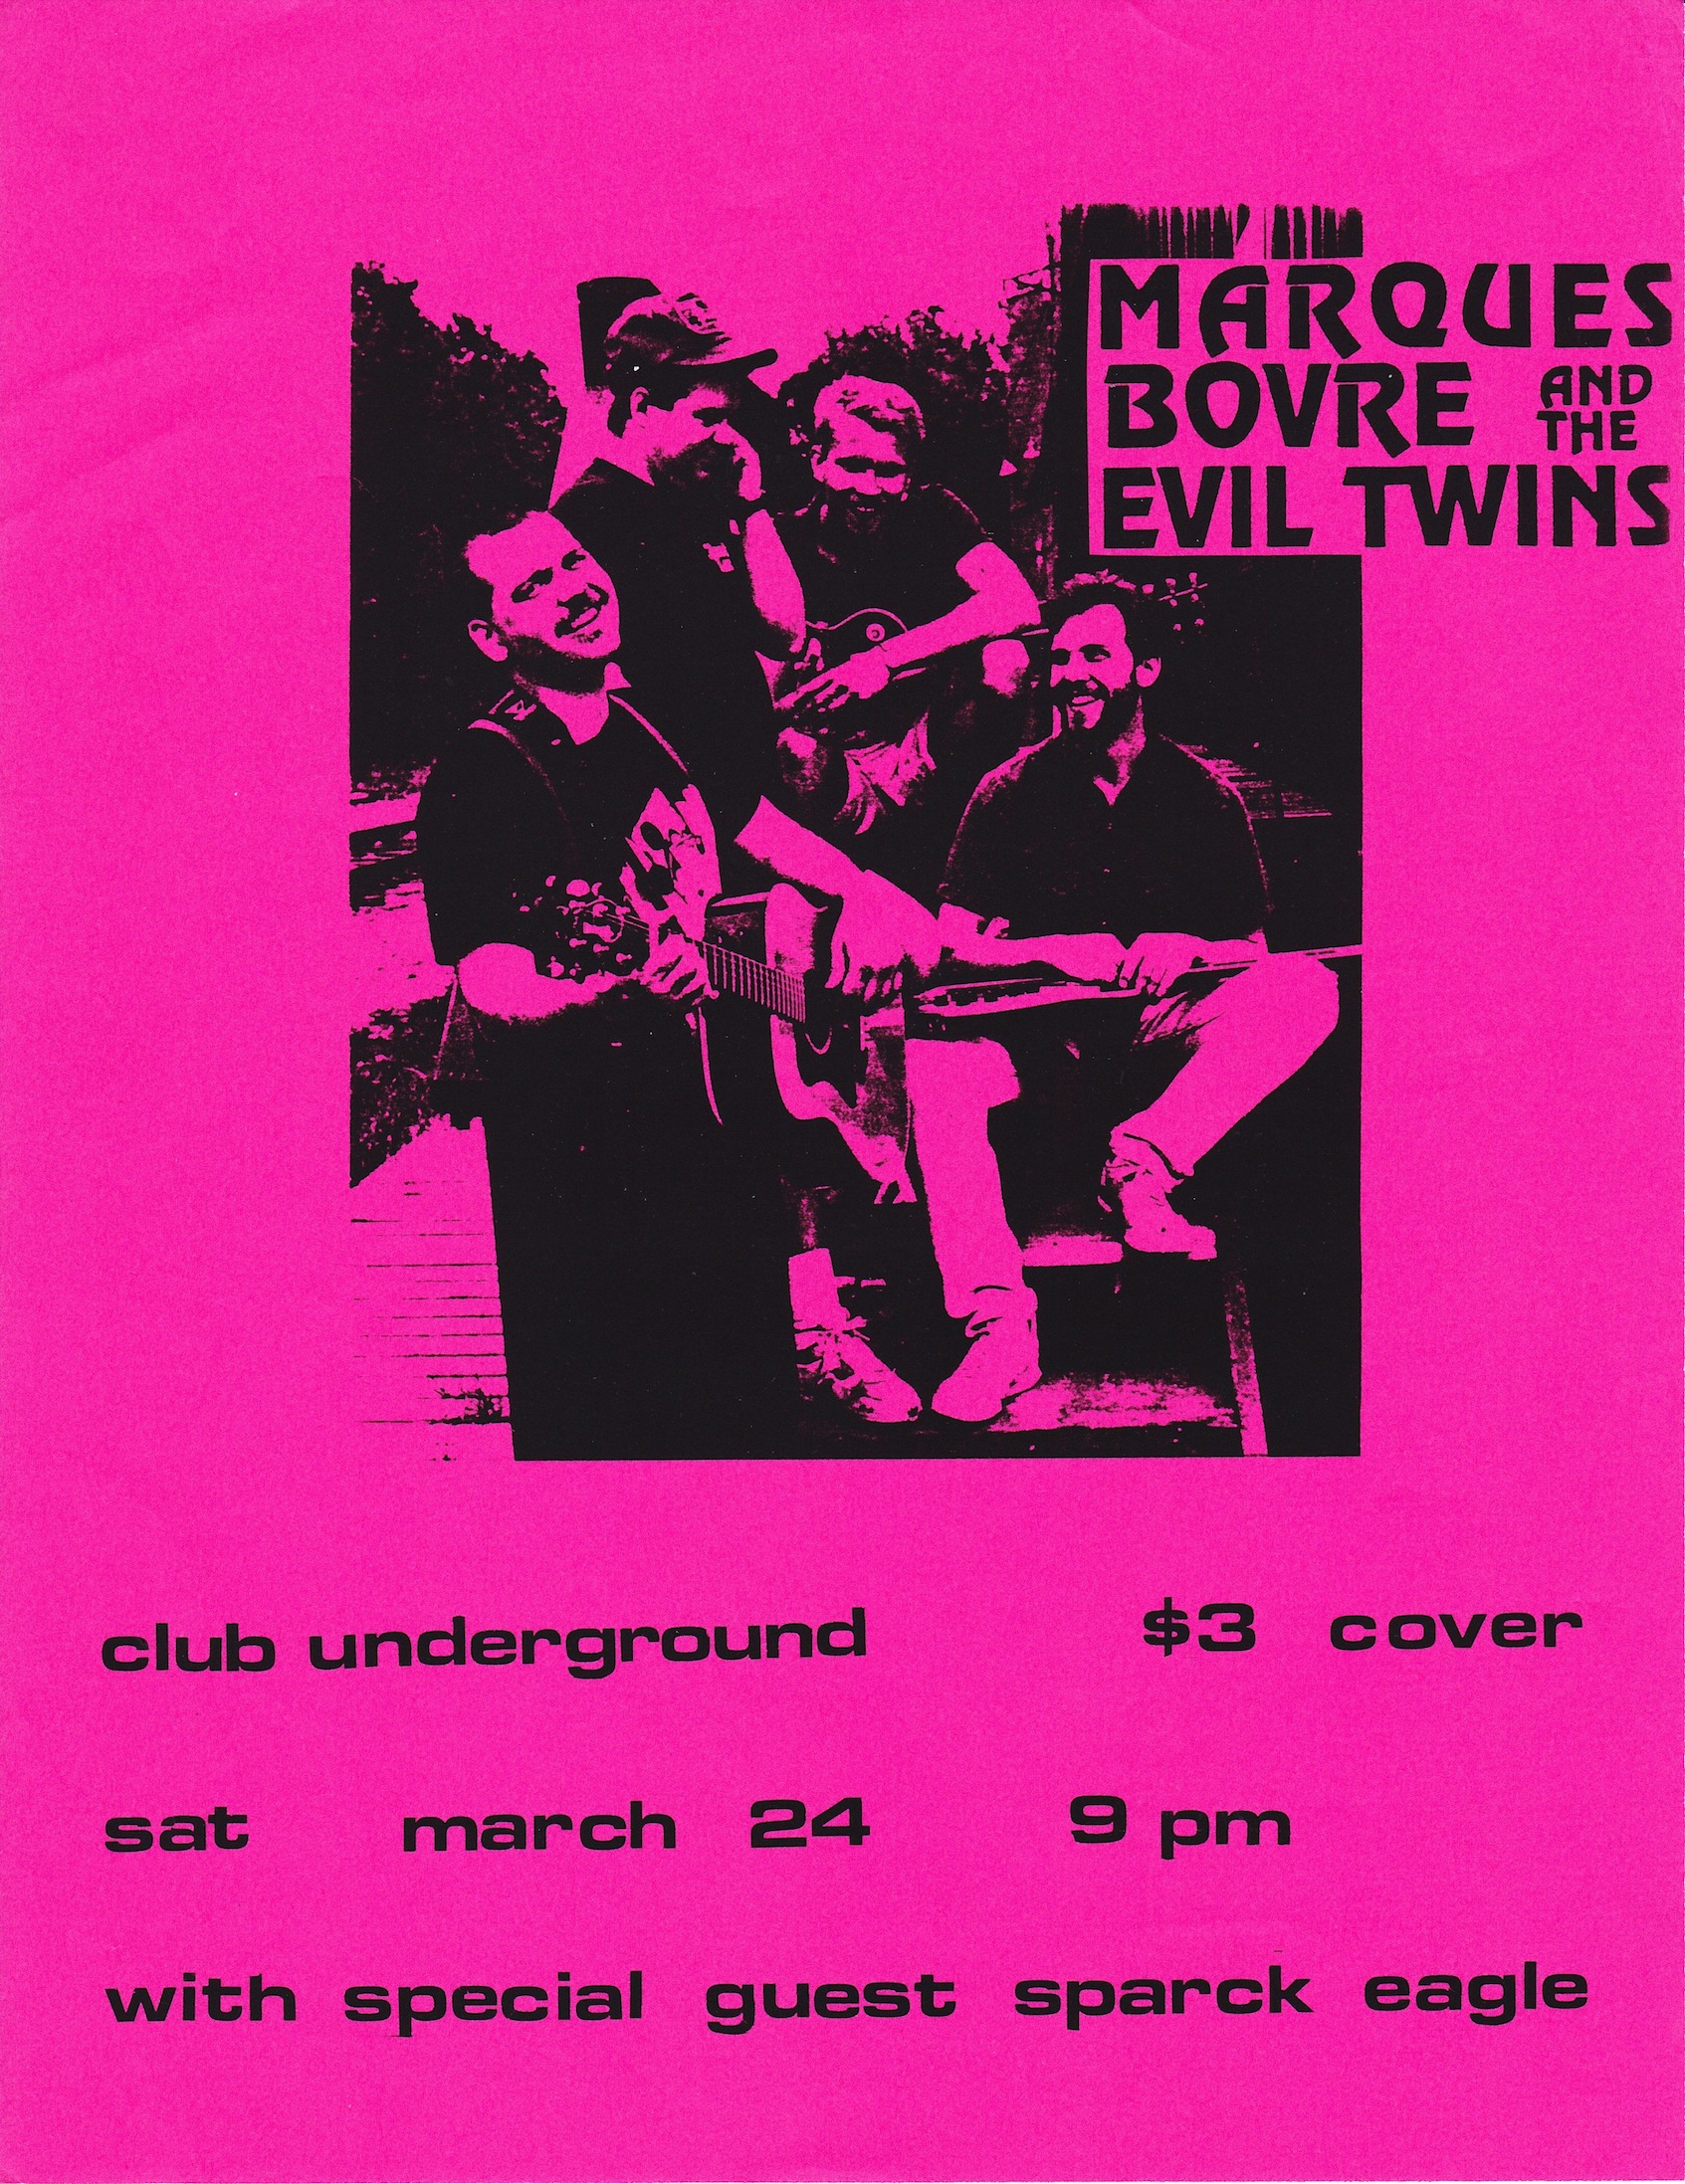 Marques Bovre and the Evil Twins, March 24, 1990